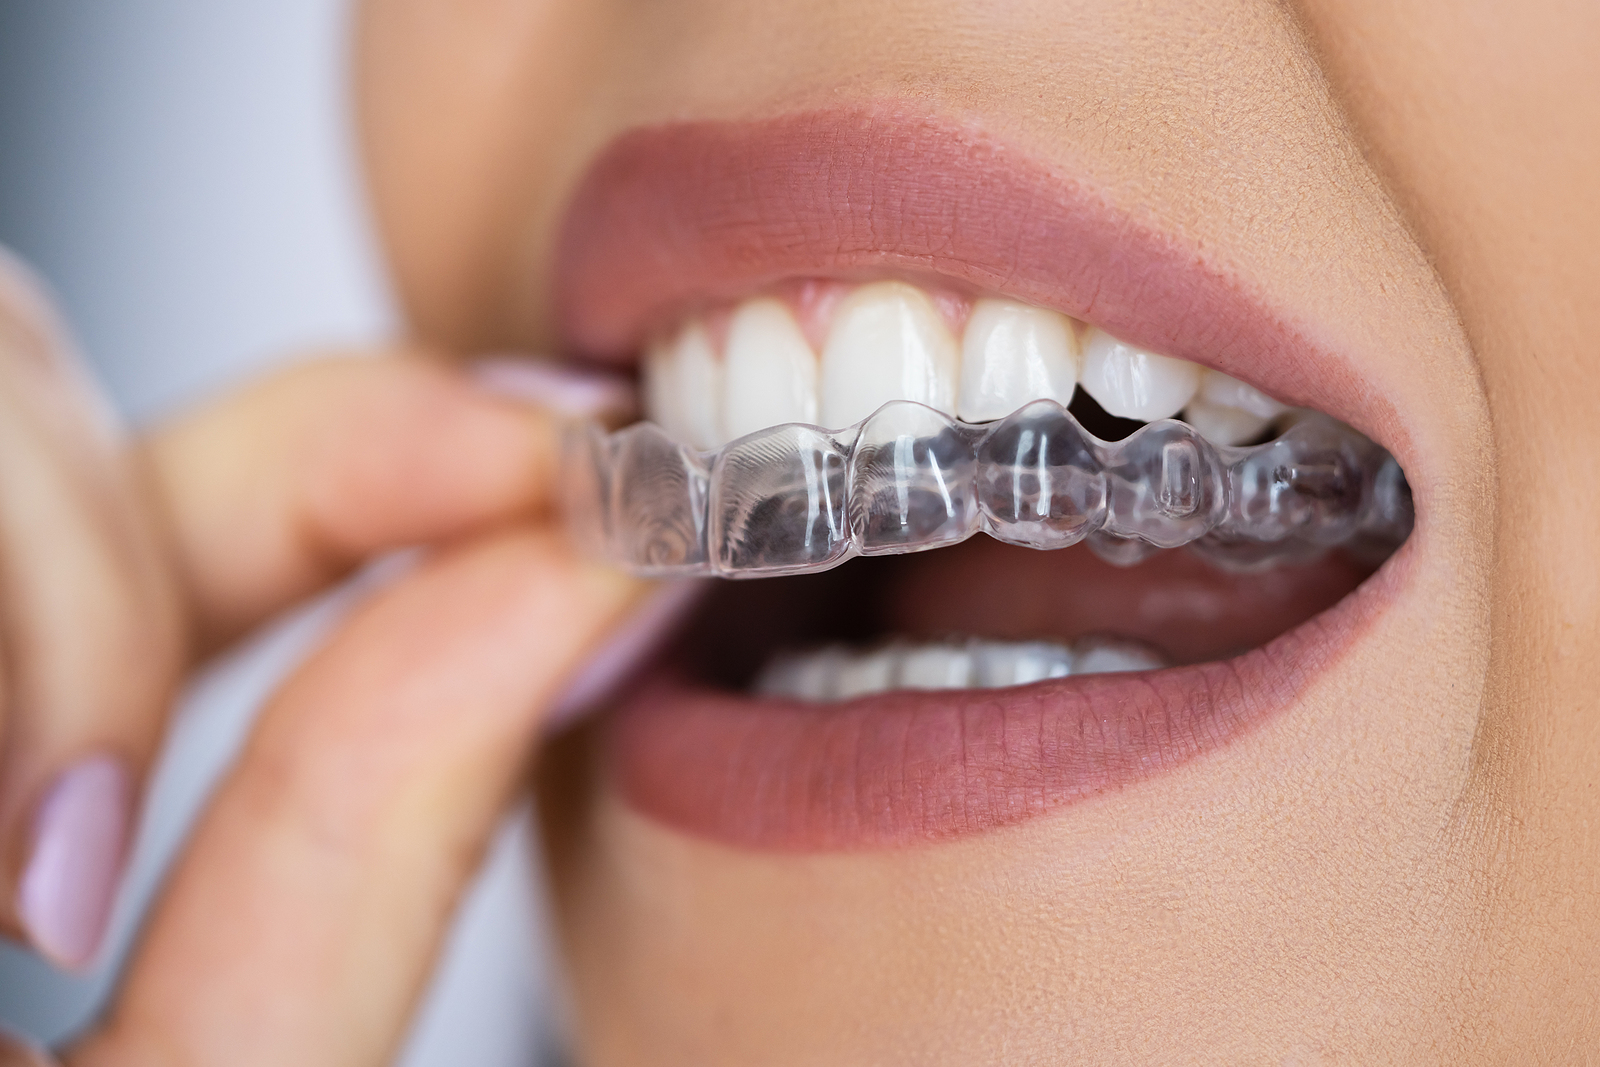 Smiles Central - Latest update - Cure For Dental Aligners In Bellandur